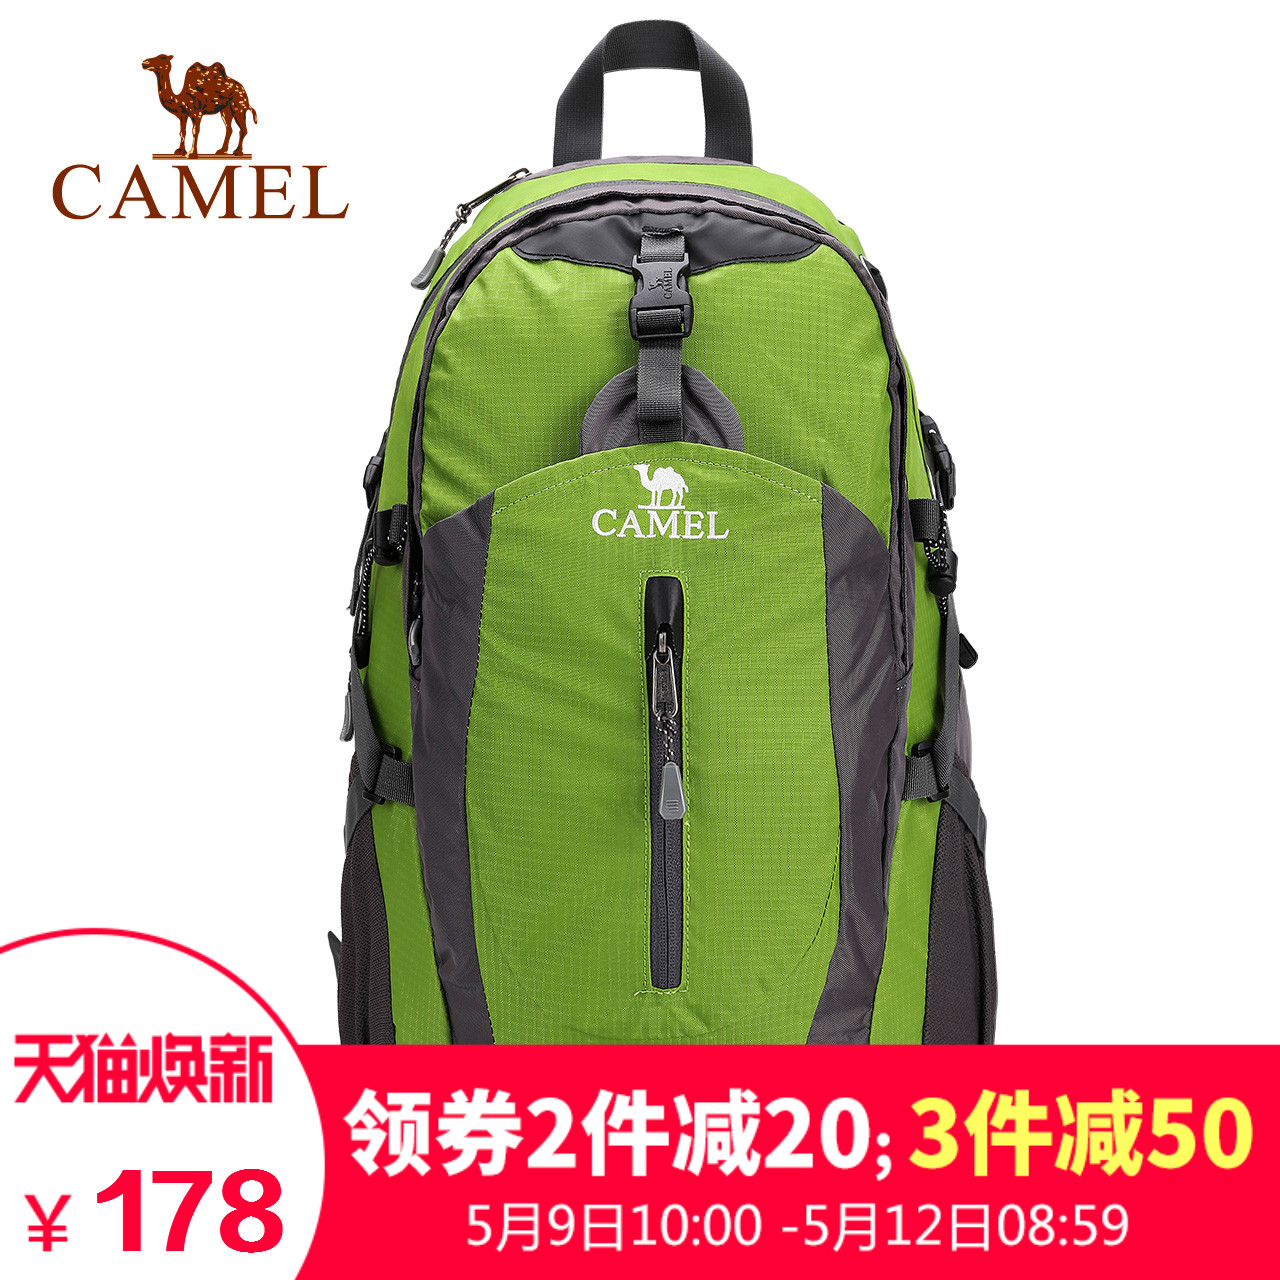 Camel outdoor light mountaineering bag multifunctional 40L hiking camping travel backpack